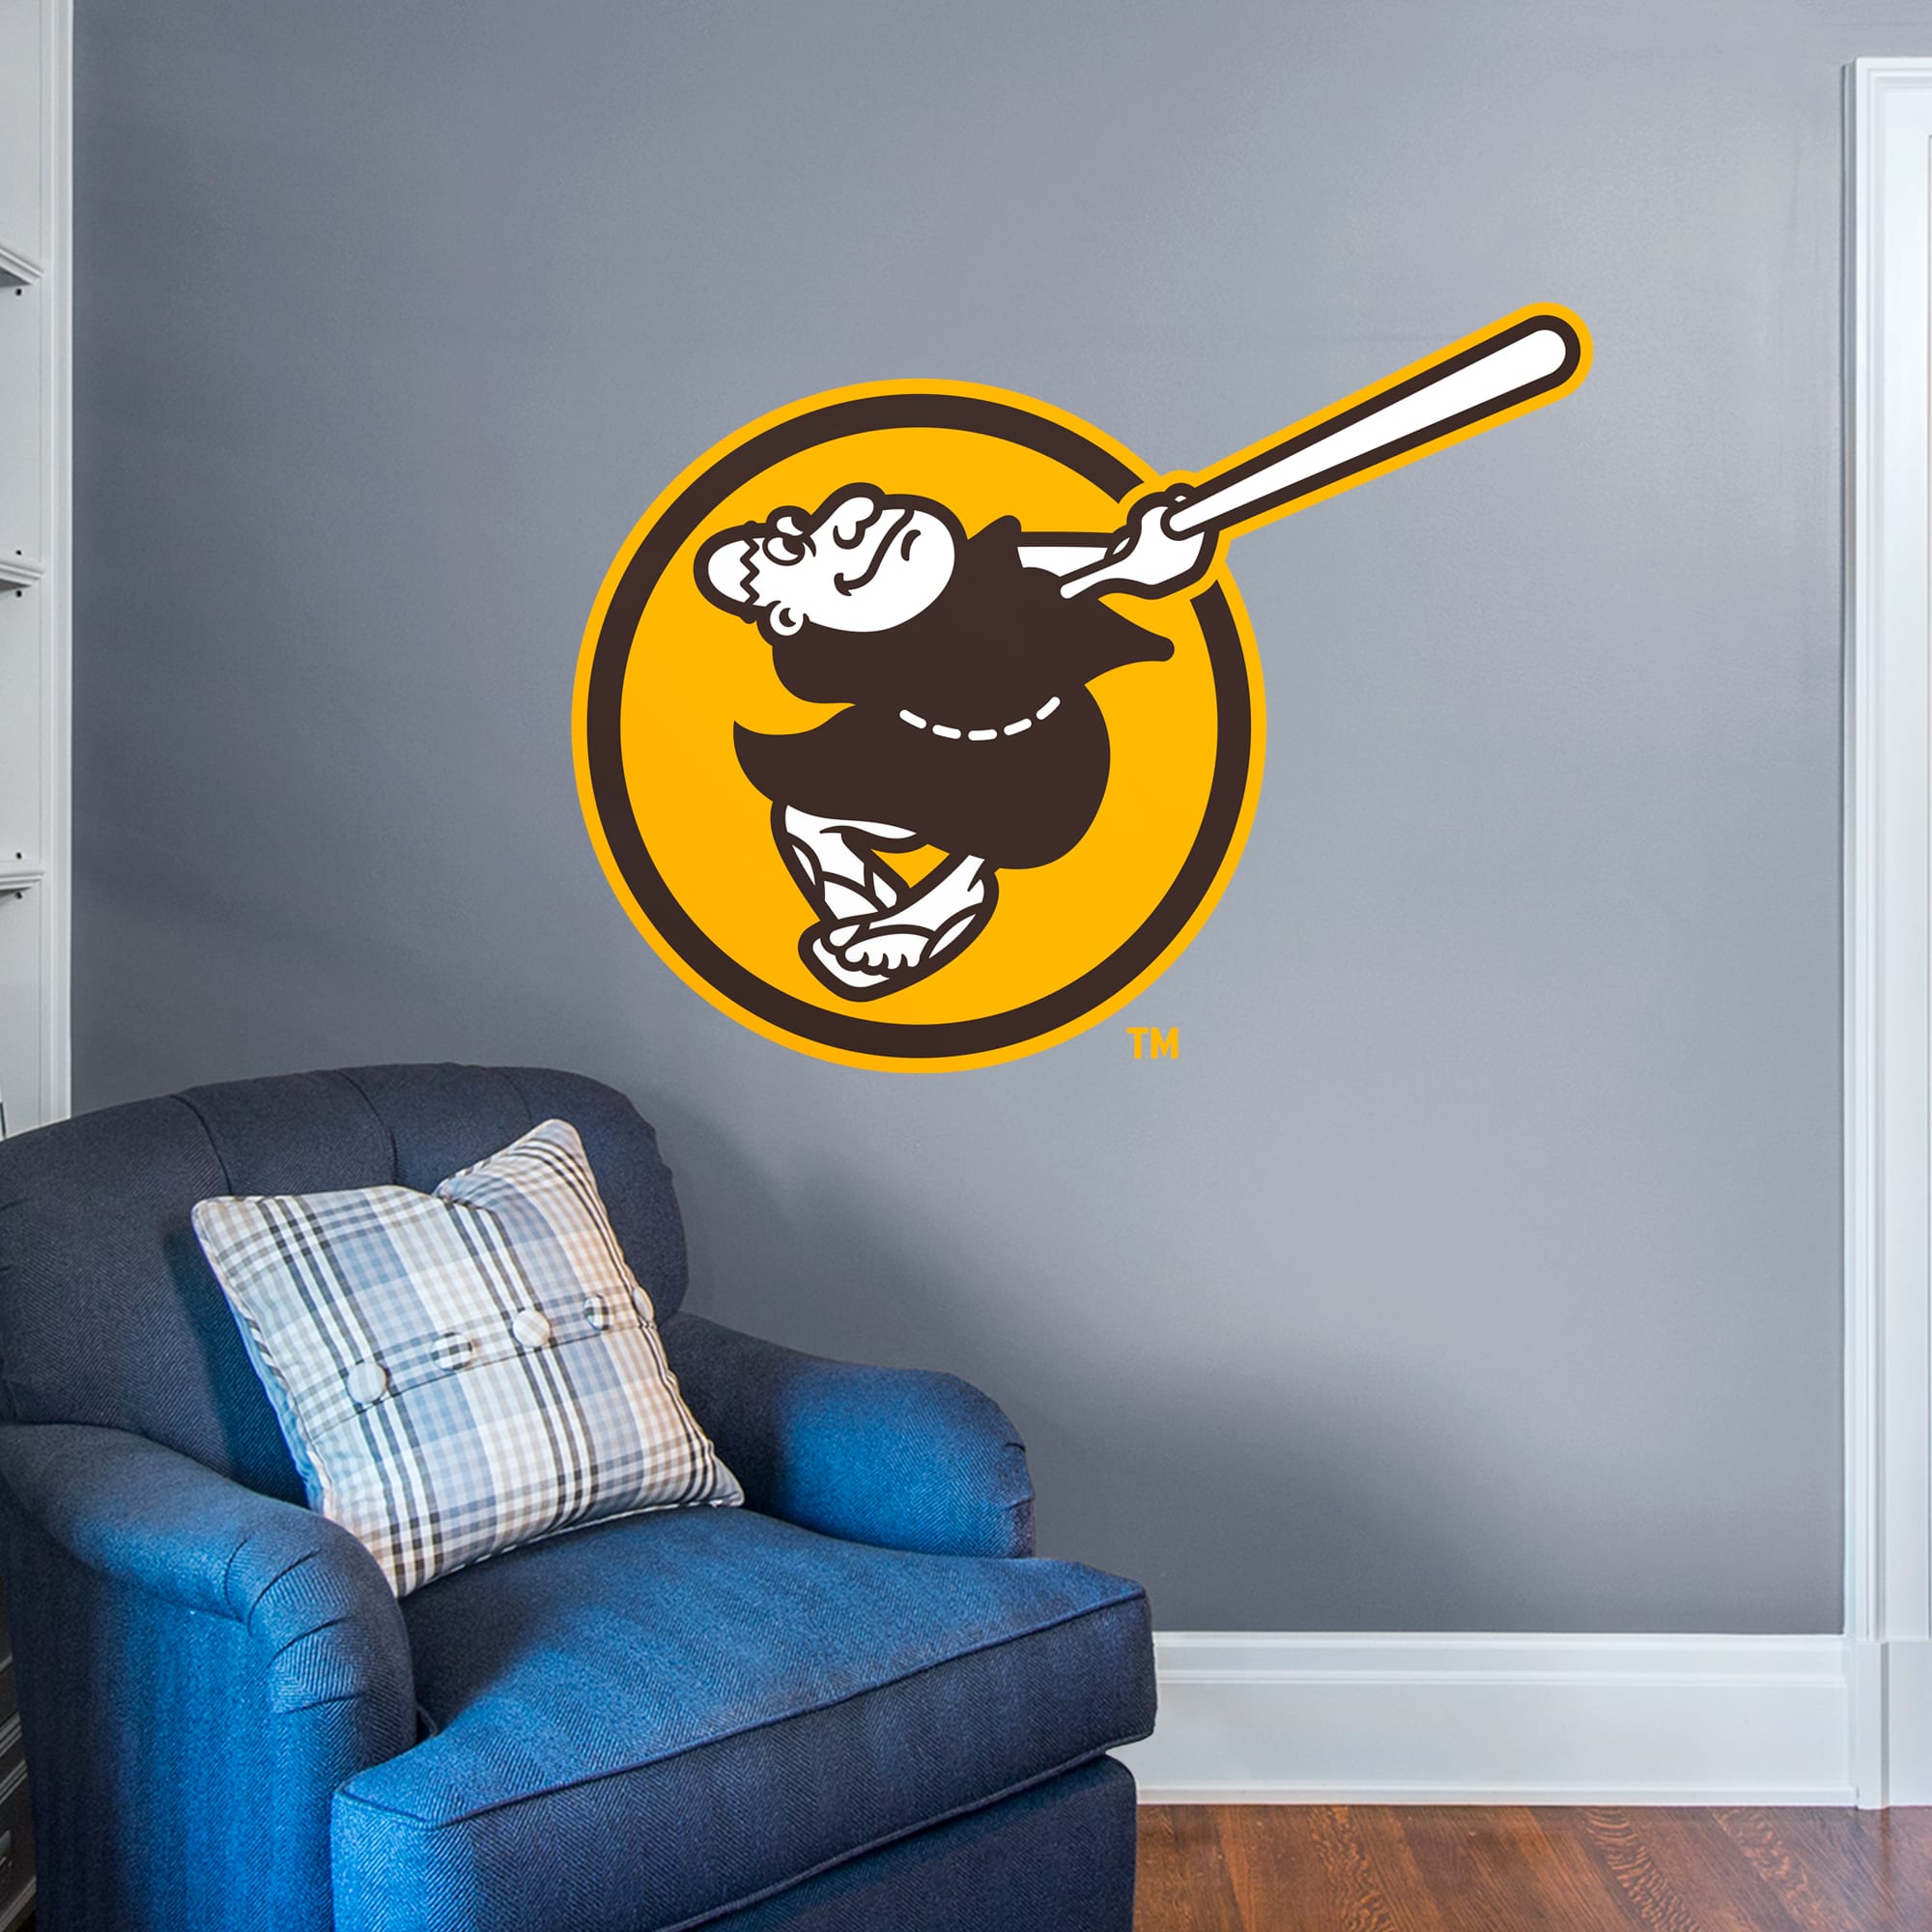 San Diego Padres: Classic Logo - Officially Licensed MLB Removable Wall Decal Giant Logo (51"W x 38.5"H) by Fathead | Vinyl